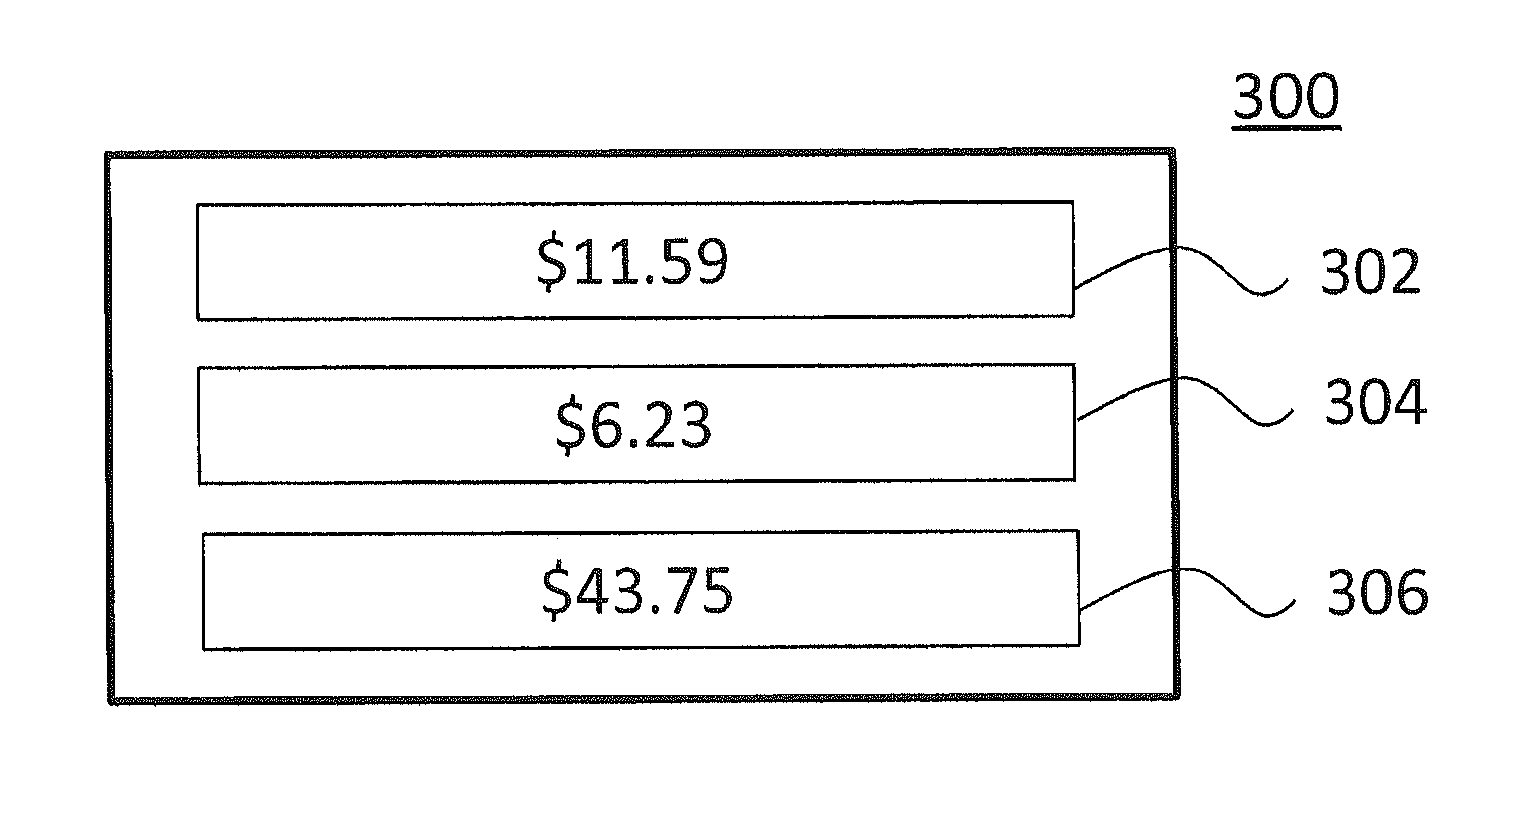 Driver display of energy consumption as a monetary rate